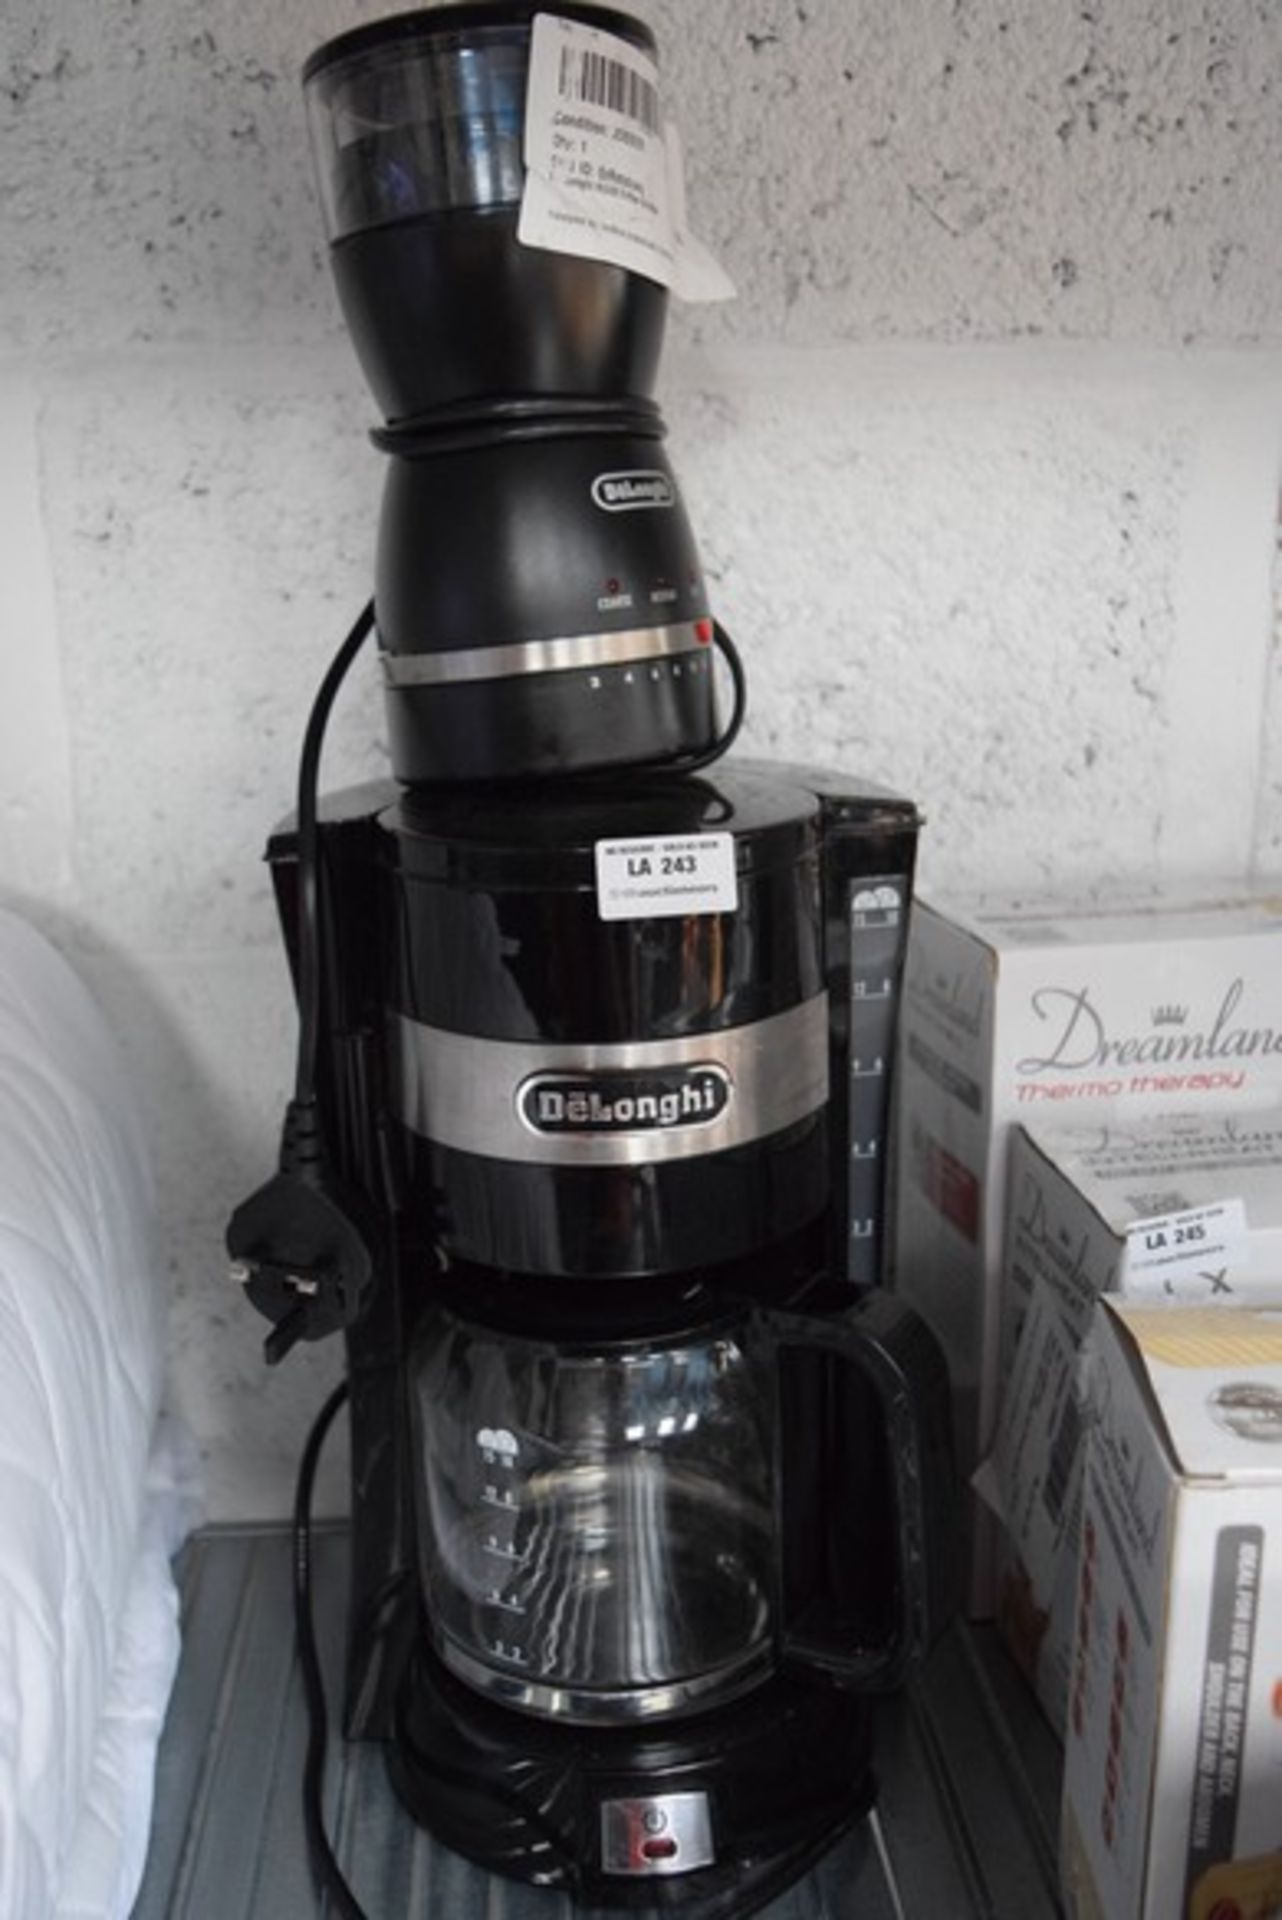 2 x ITEMS TO INCLUDE DELONGHI COFFEE GRINDER AND FILTER COFFEE MACHINE COMBINED RRP £70 03.05.17 *